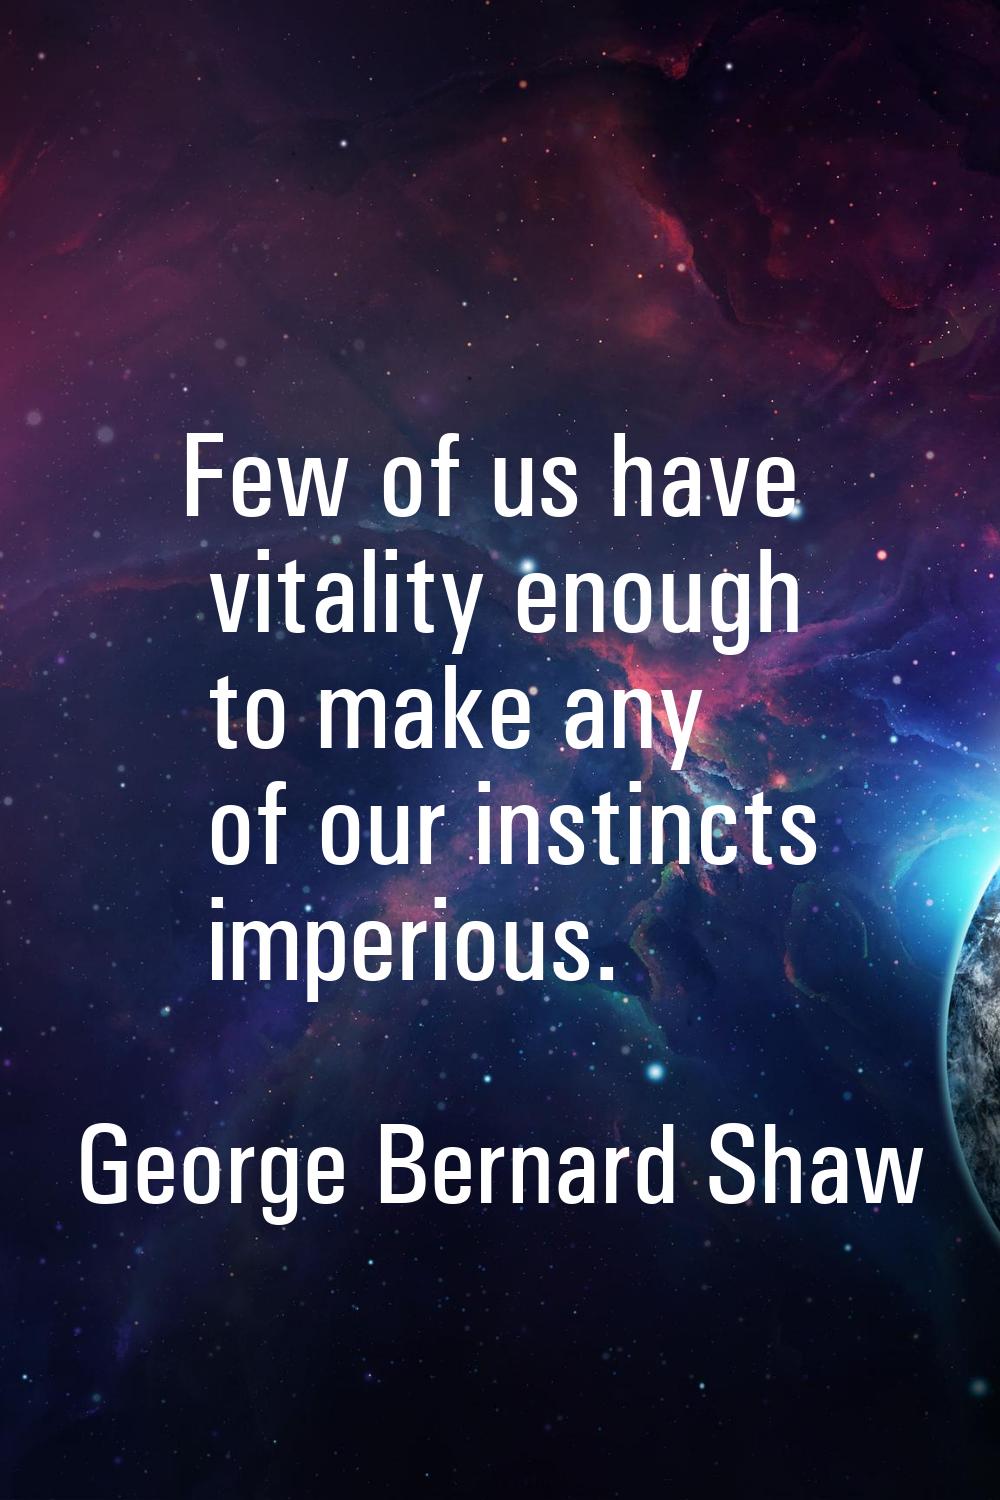 Few of us have vitality enough to make any of our instincts imperious.